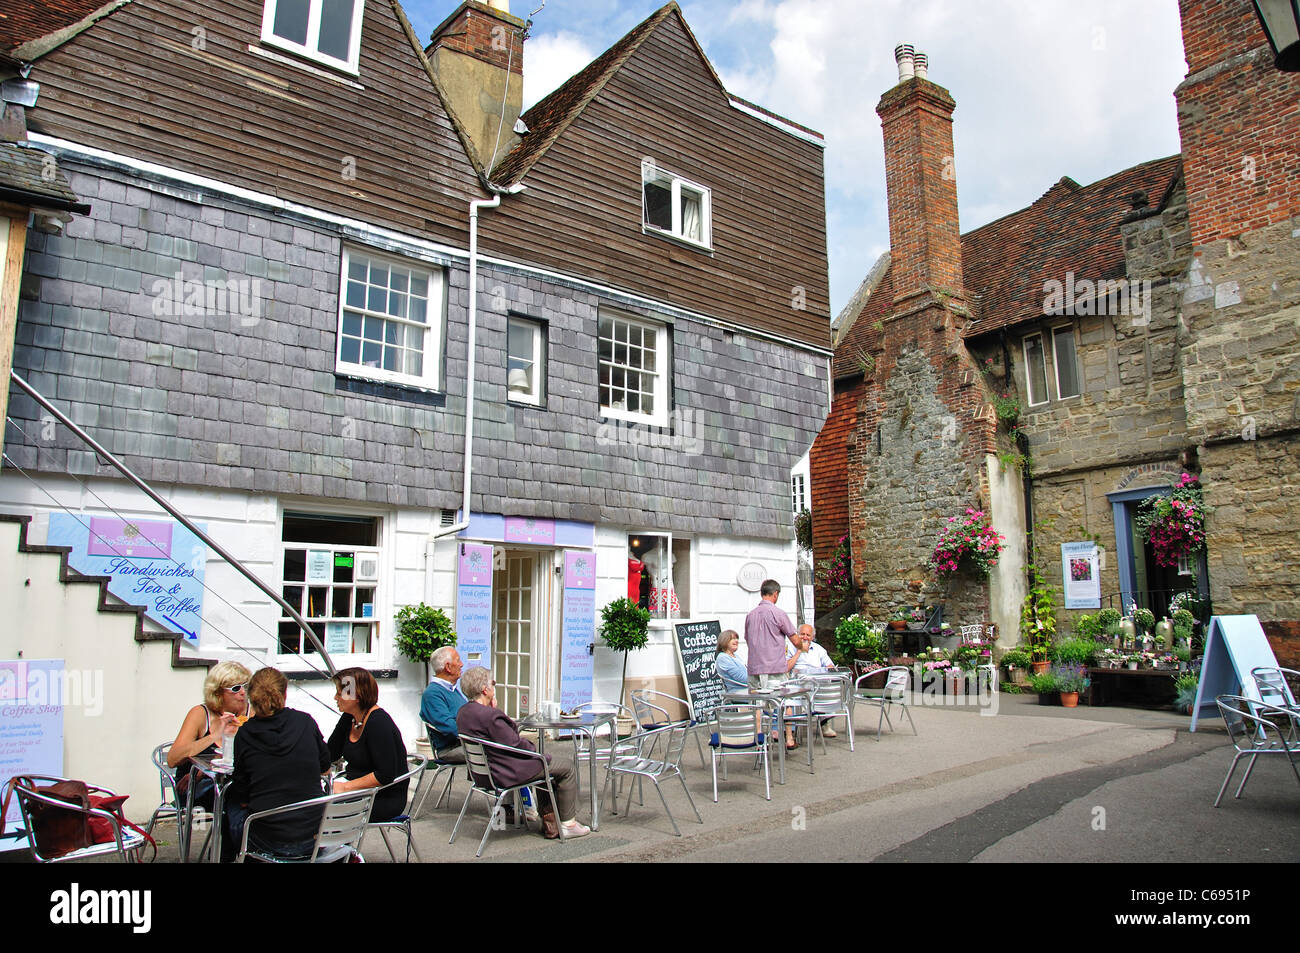 Bay Tree Bakery Café, carré d'or, Petworth, West Sussex, Angleterre, Royaume-Uni Banque D'Images